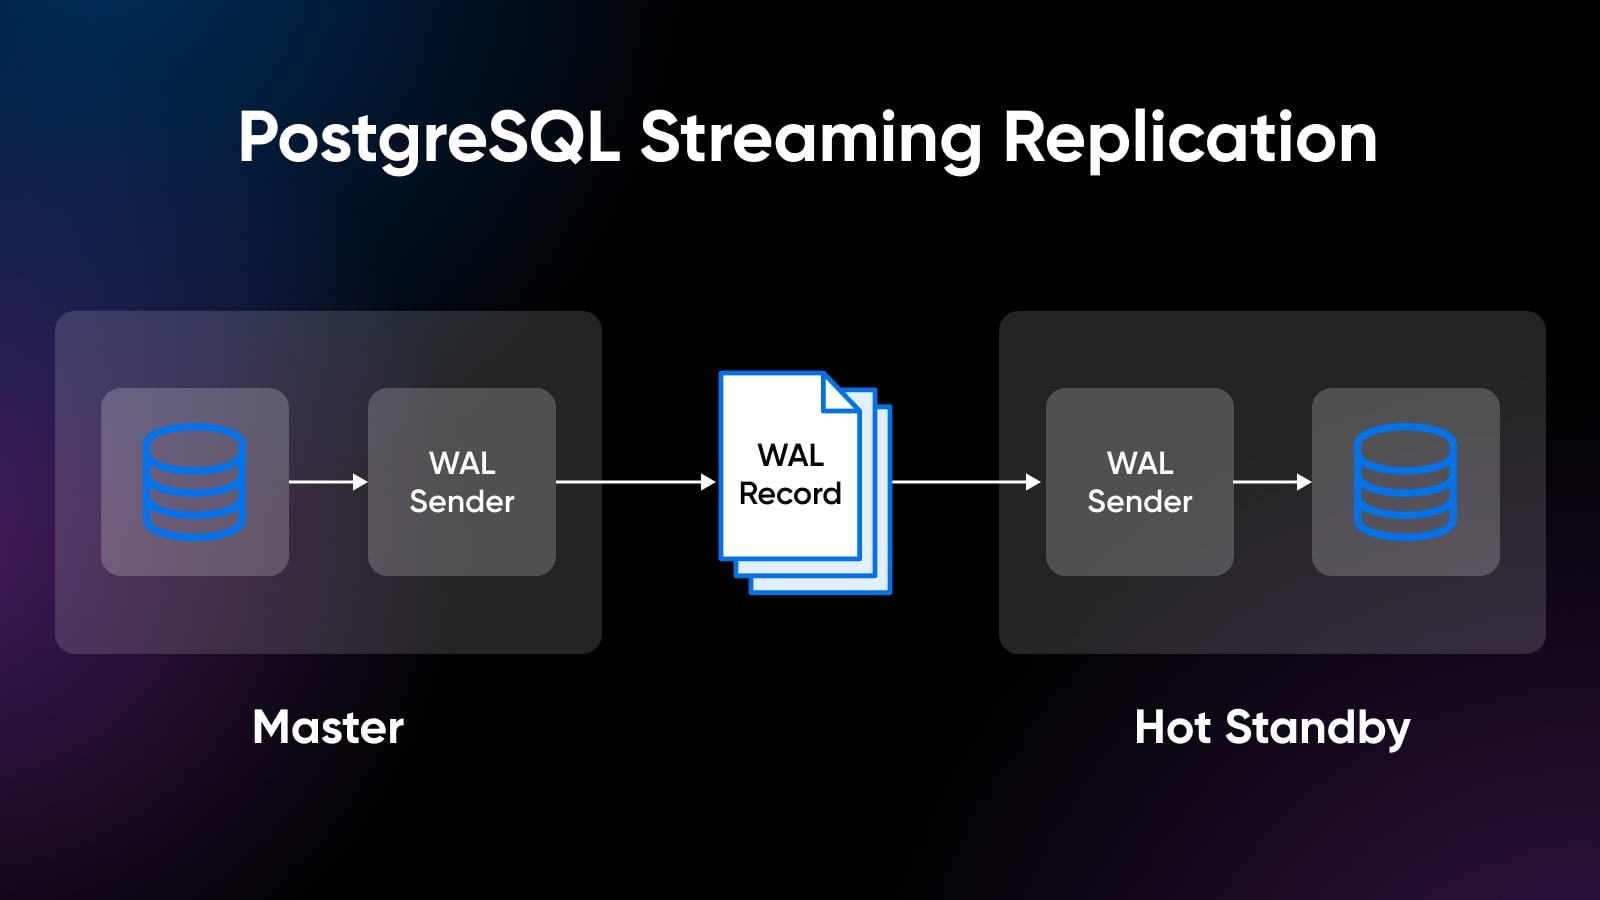 postgresql streaming replication from master to wal record to hot standby